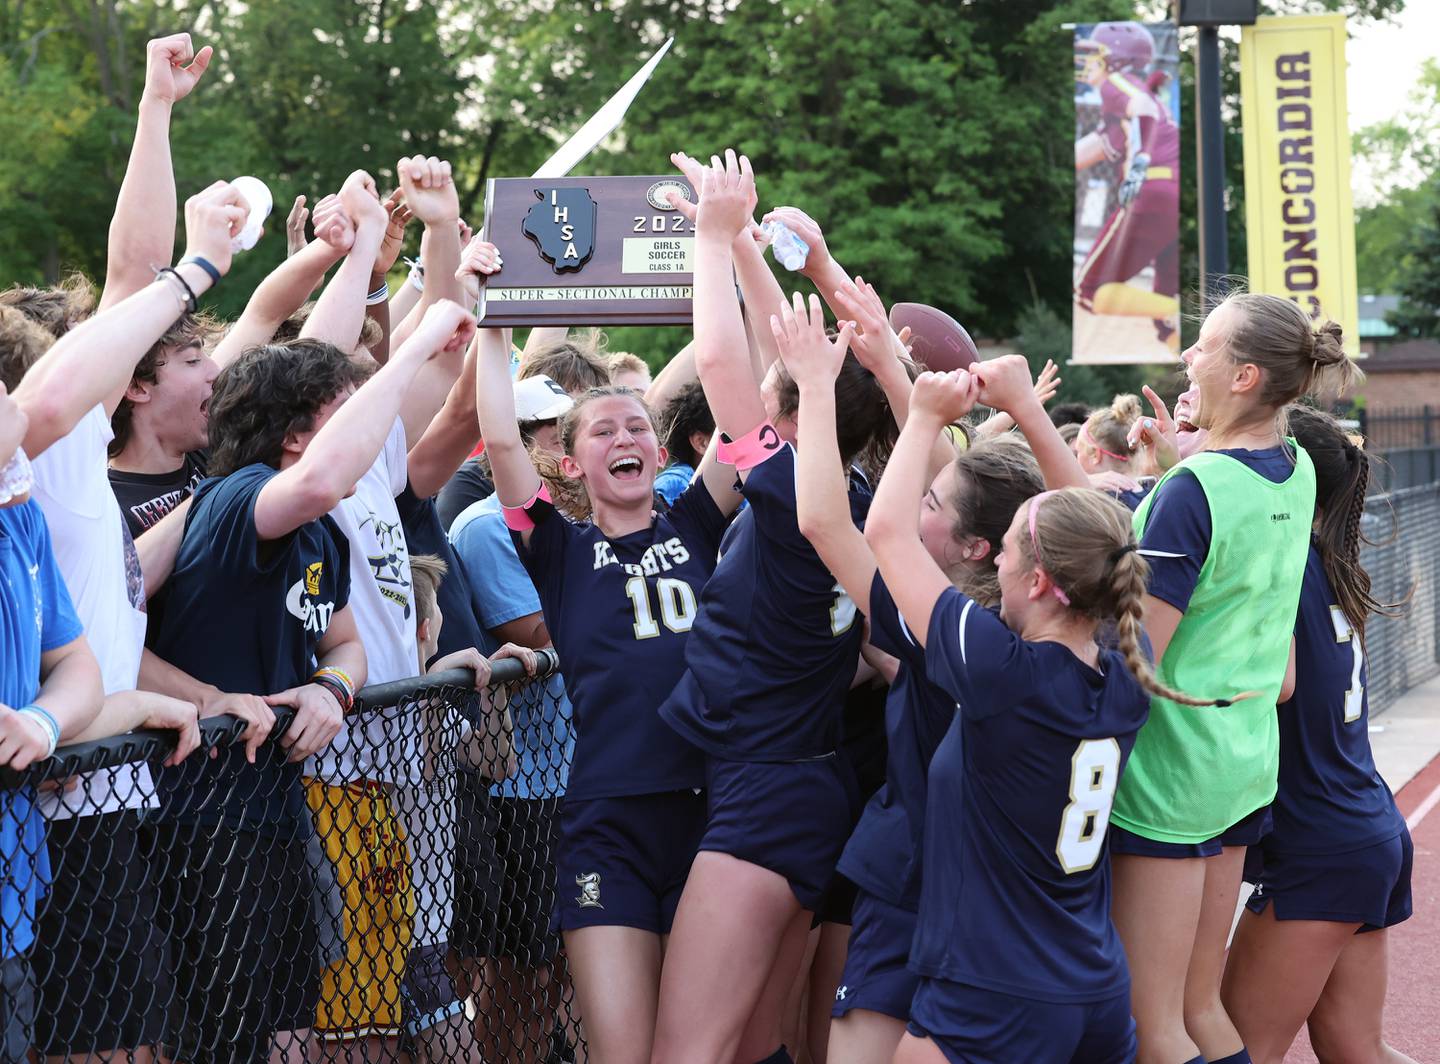 IC Catholic's Ashley Zwolinski (10) holds the championship plaque as the team celebrates their victory with their fans after the IHSA Class 1A girls soccer super-sectional match between Richmond-Burton and IC Catholic at Concordia University in River Forest on Tuesday, May 23, 2023.